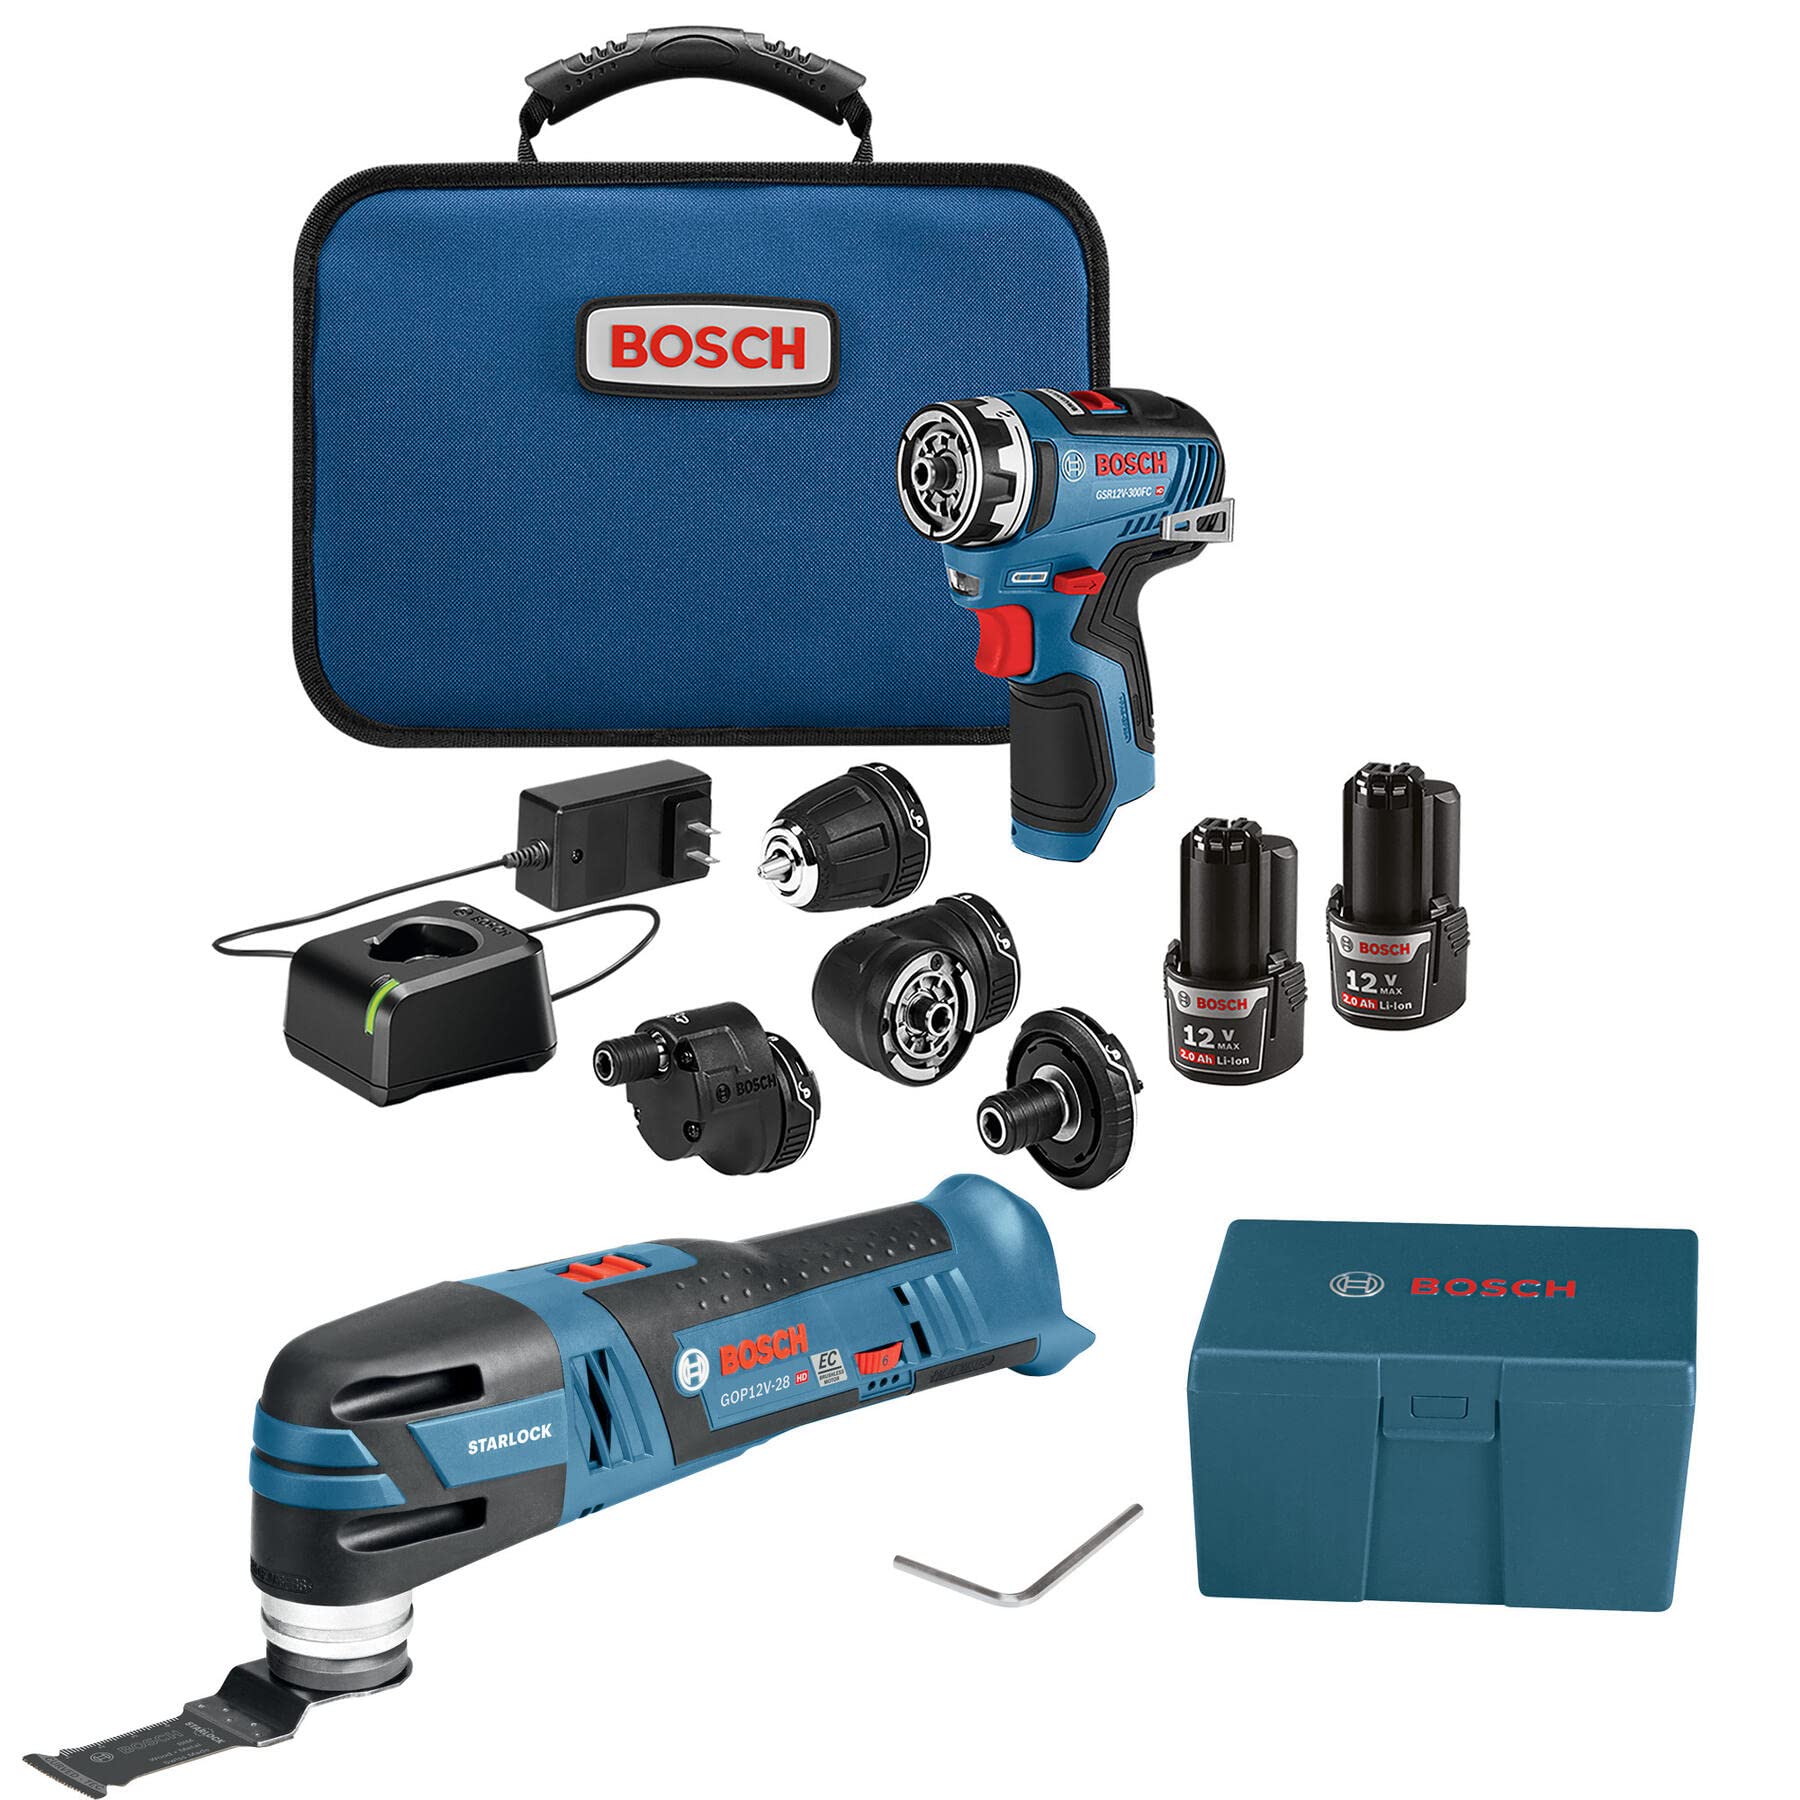 BOSCH 12V Max 2-Tool Combo Kit with Chameleon Drill/Driver and Starlock® Oscillating Multi-Tool $134 - free shipping